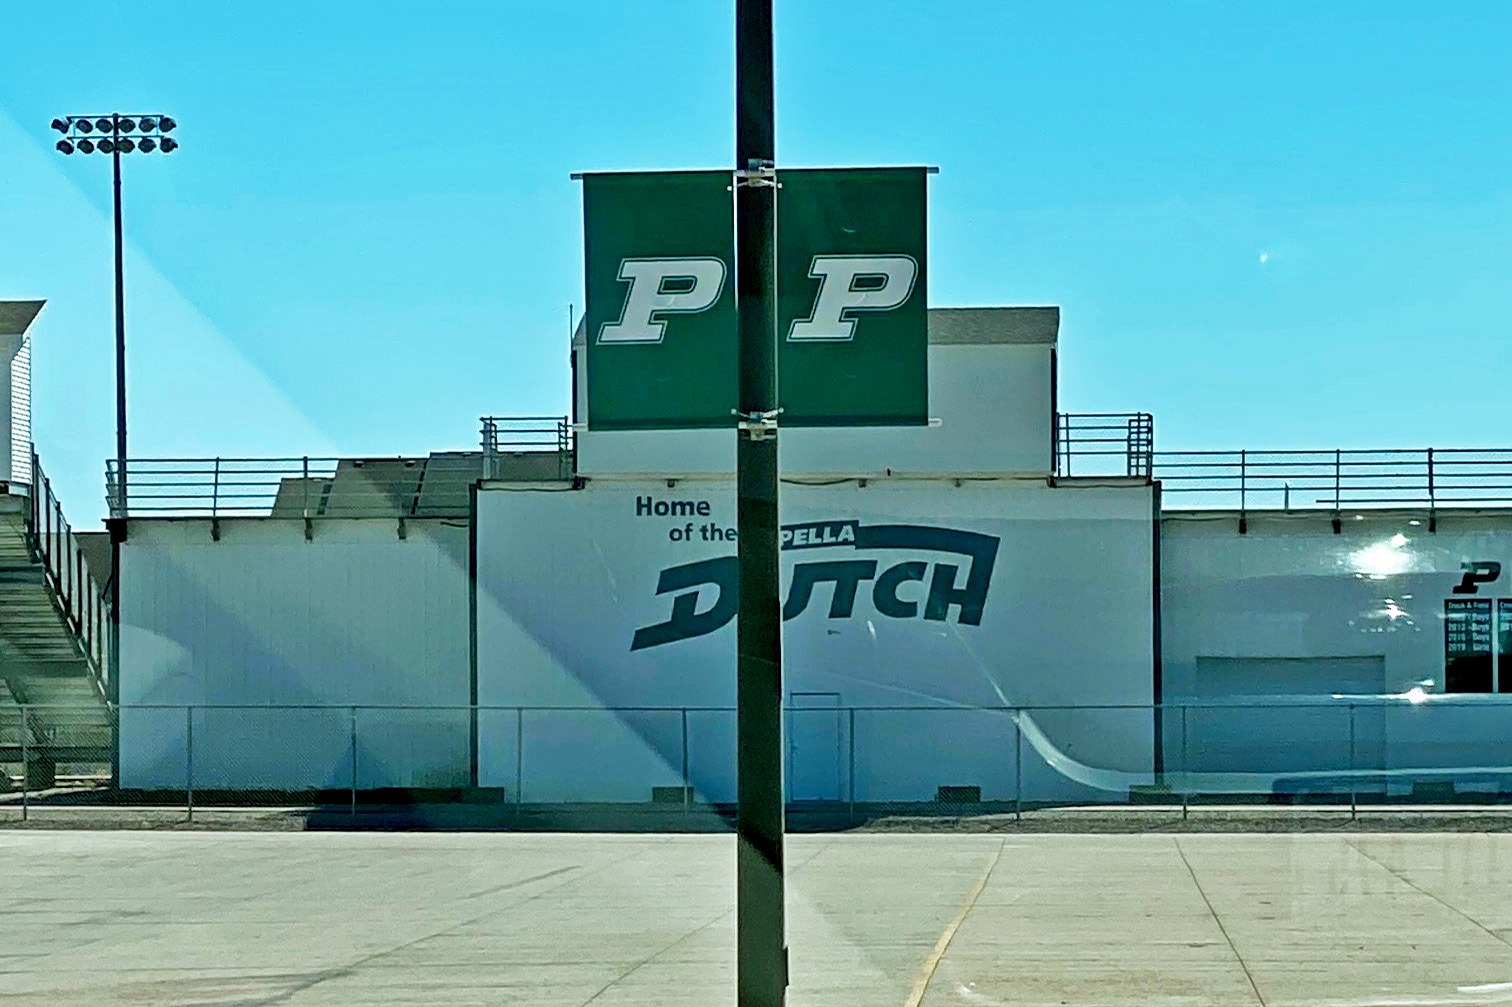 Two green banners with letter P on lampposts in front of school stadium